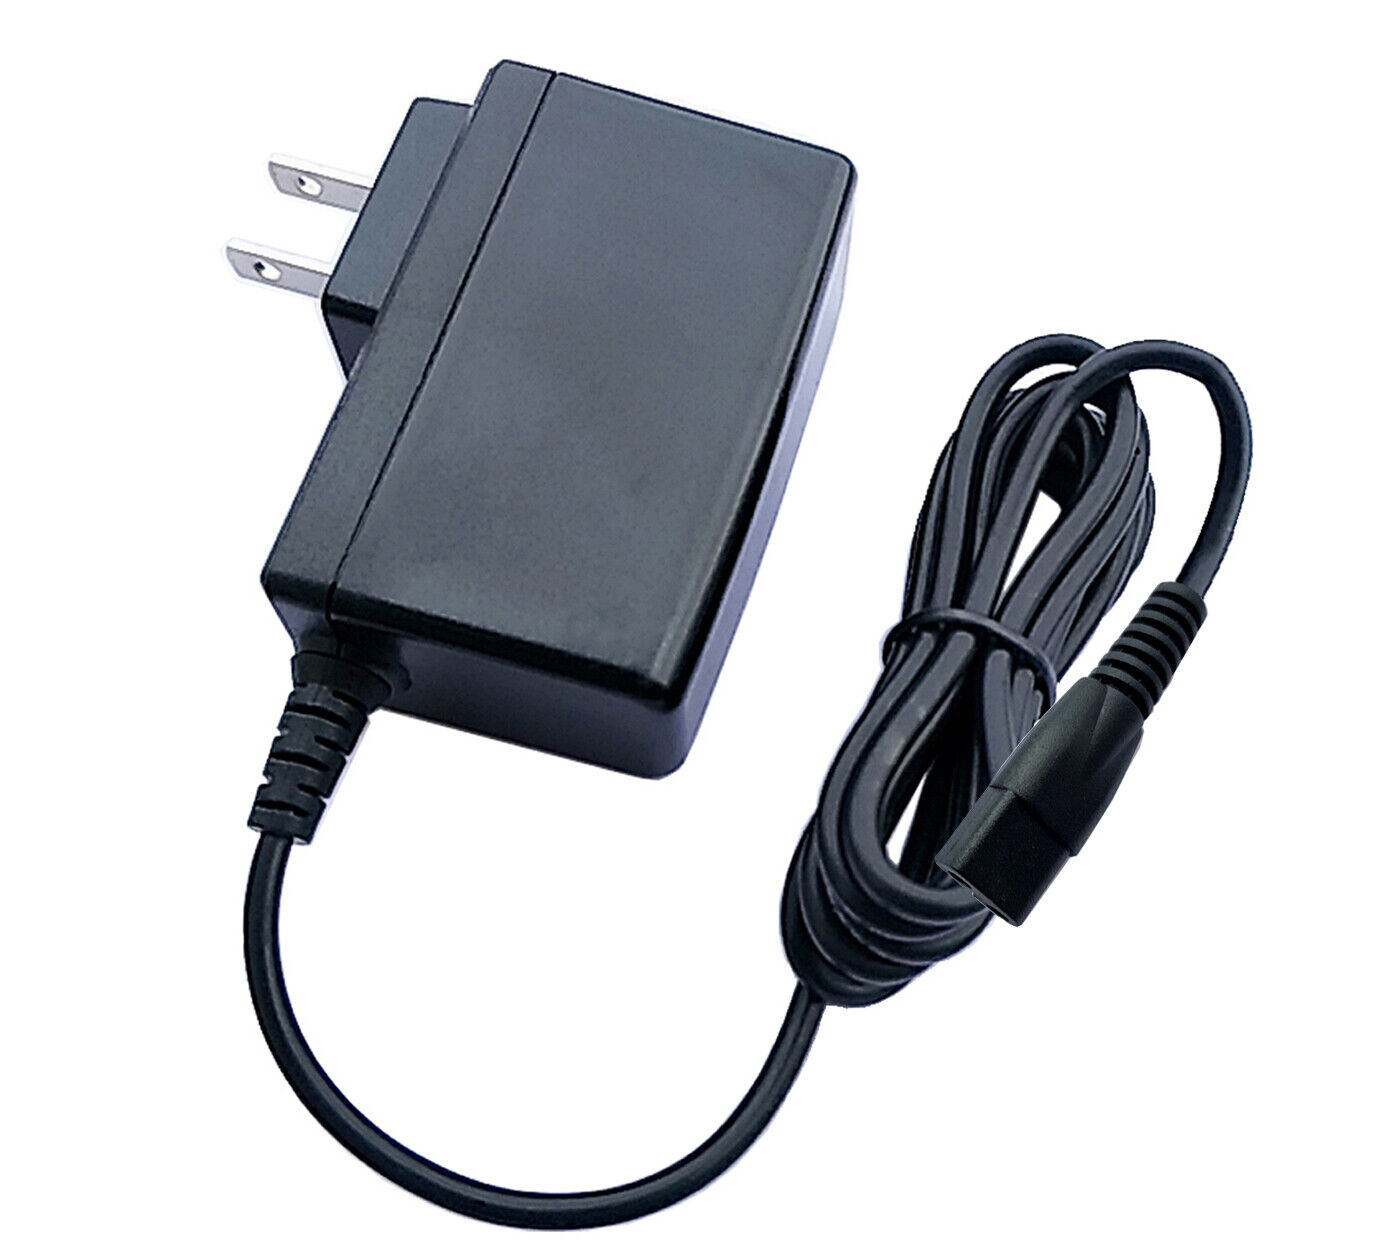 PSR-323 P-70 NP-V60 YDP-143 Genuine oem Yamaha AC Adapter Power Supply for PSR KB YPT YDP NP Piano Keyboard Compatible